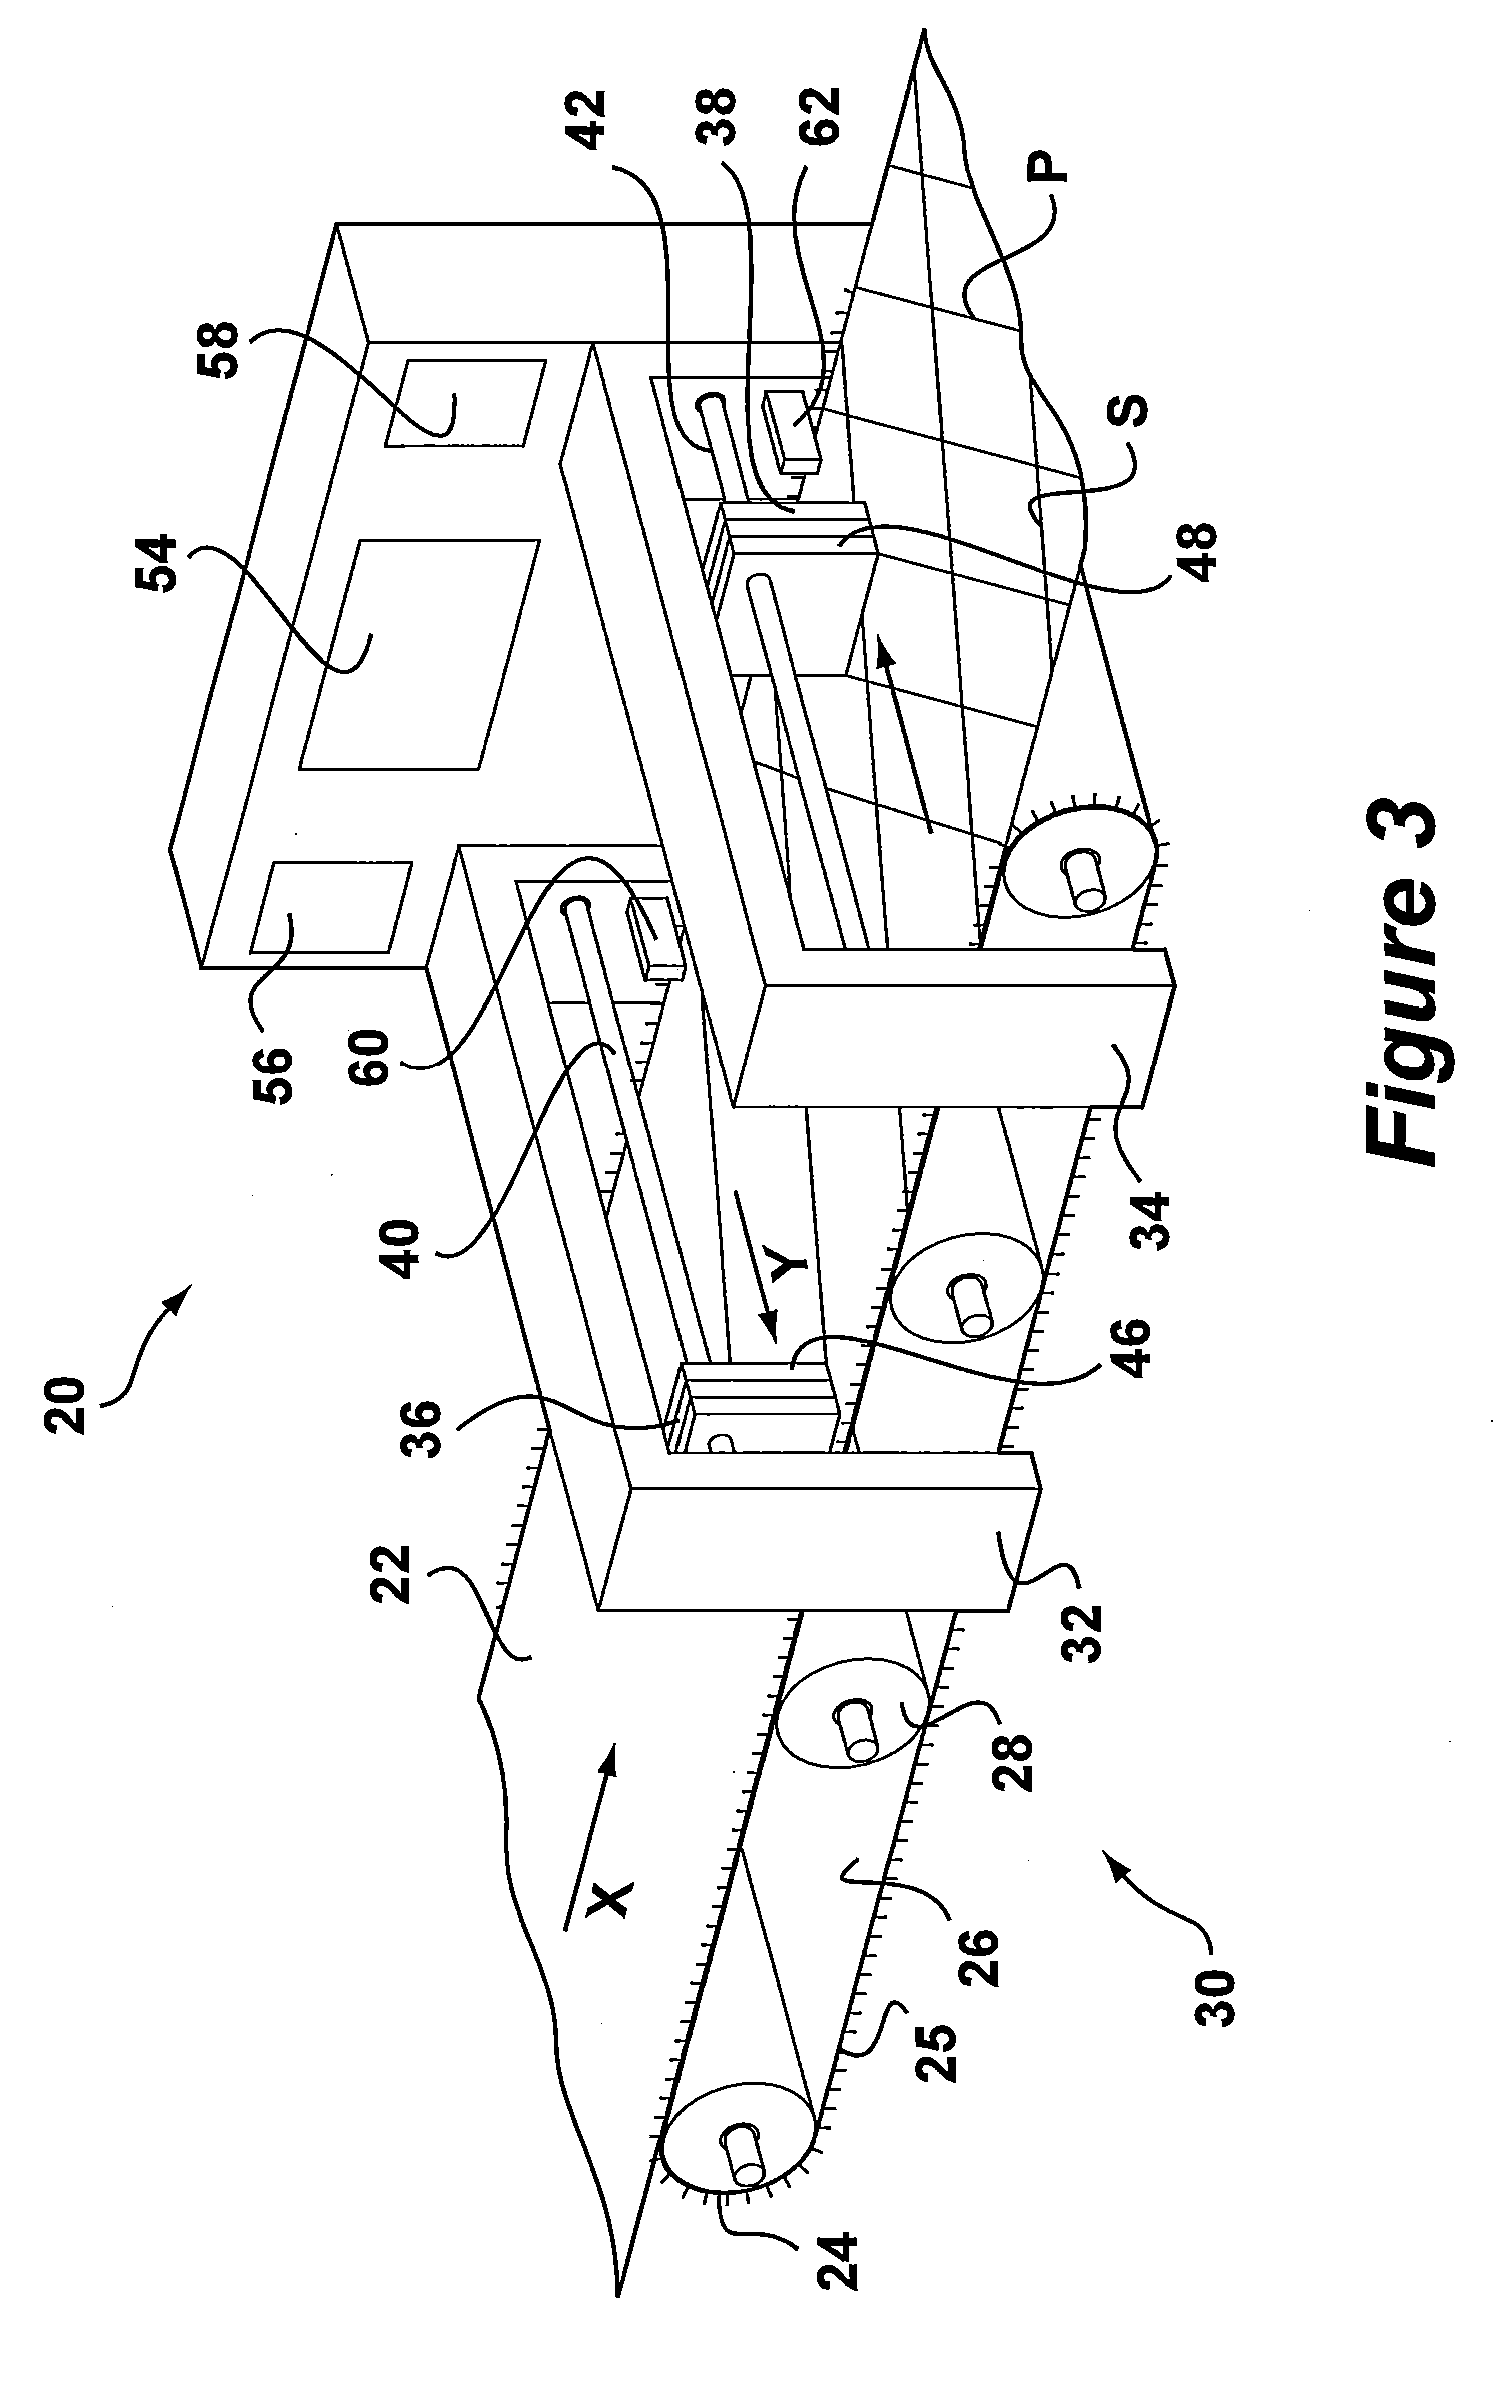 Print head arrangement and method of depositing a substance